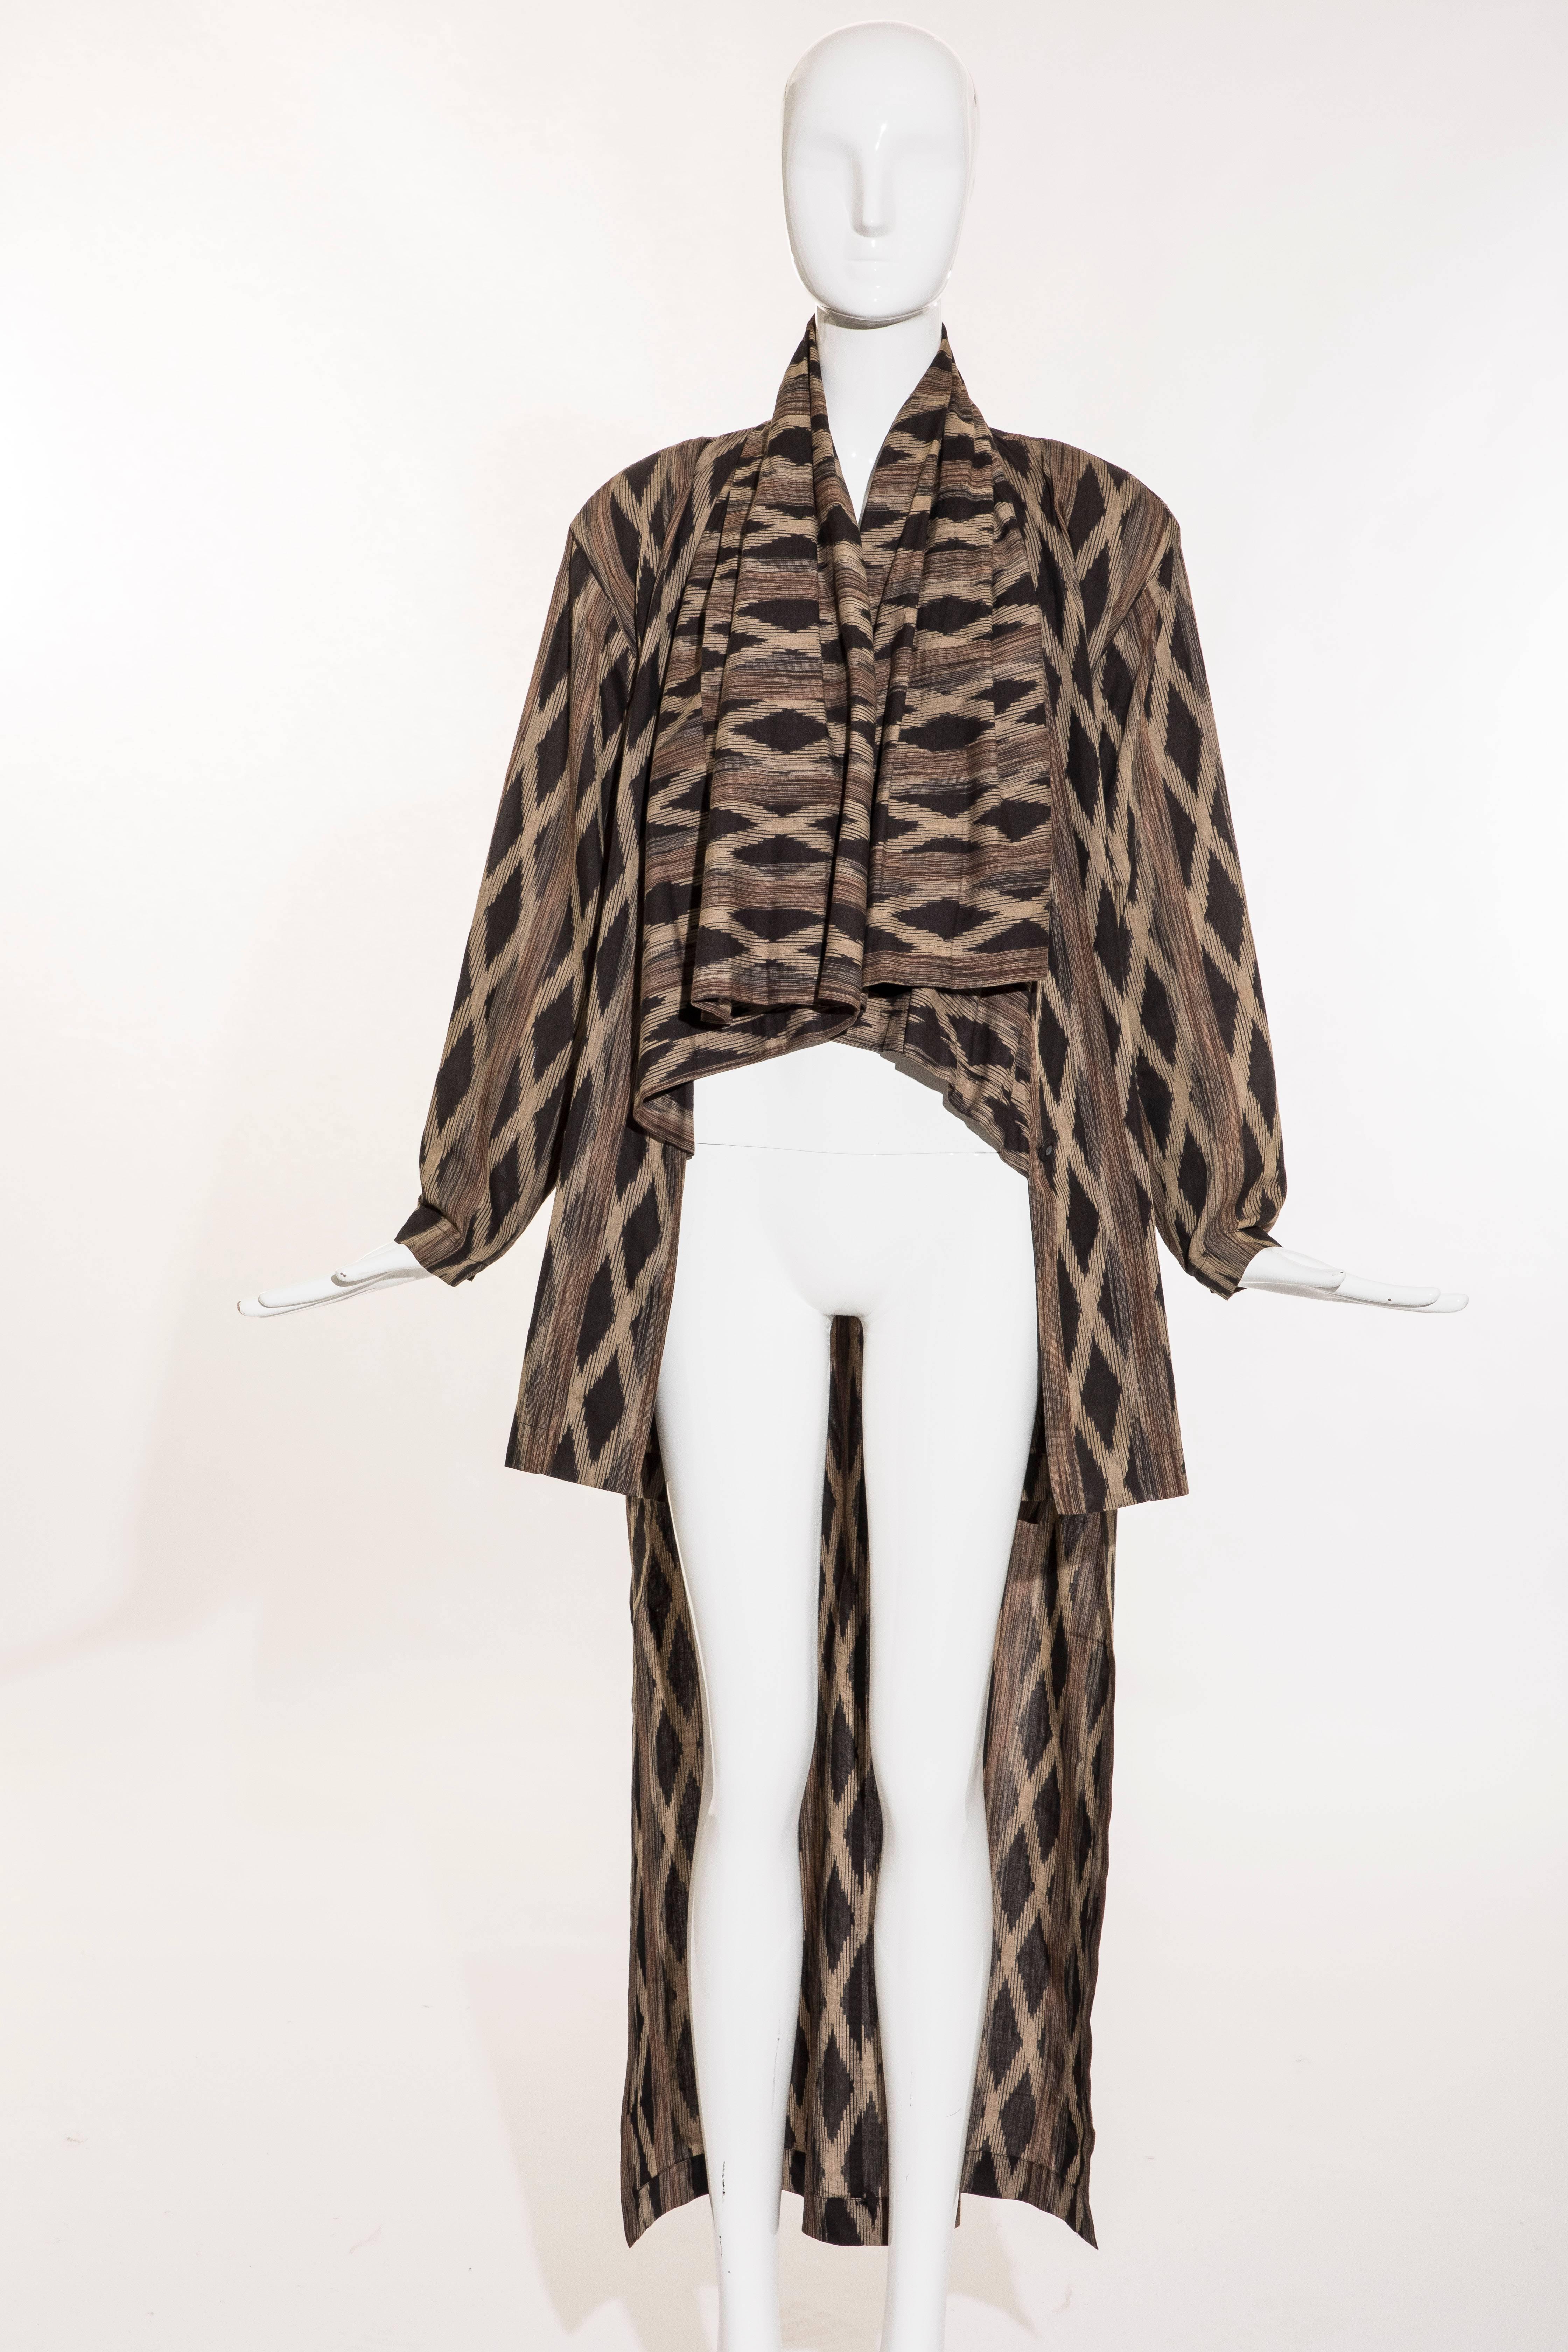 Issey Miyake Cotton Silk Lattice Weave Jacket Duster Cardigan, Fall 1986 For Sale 4